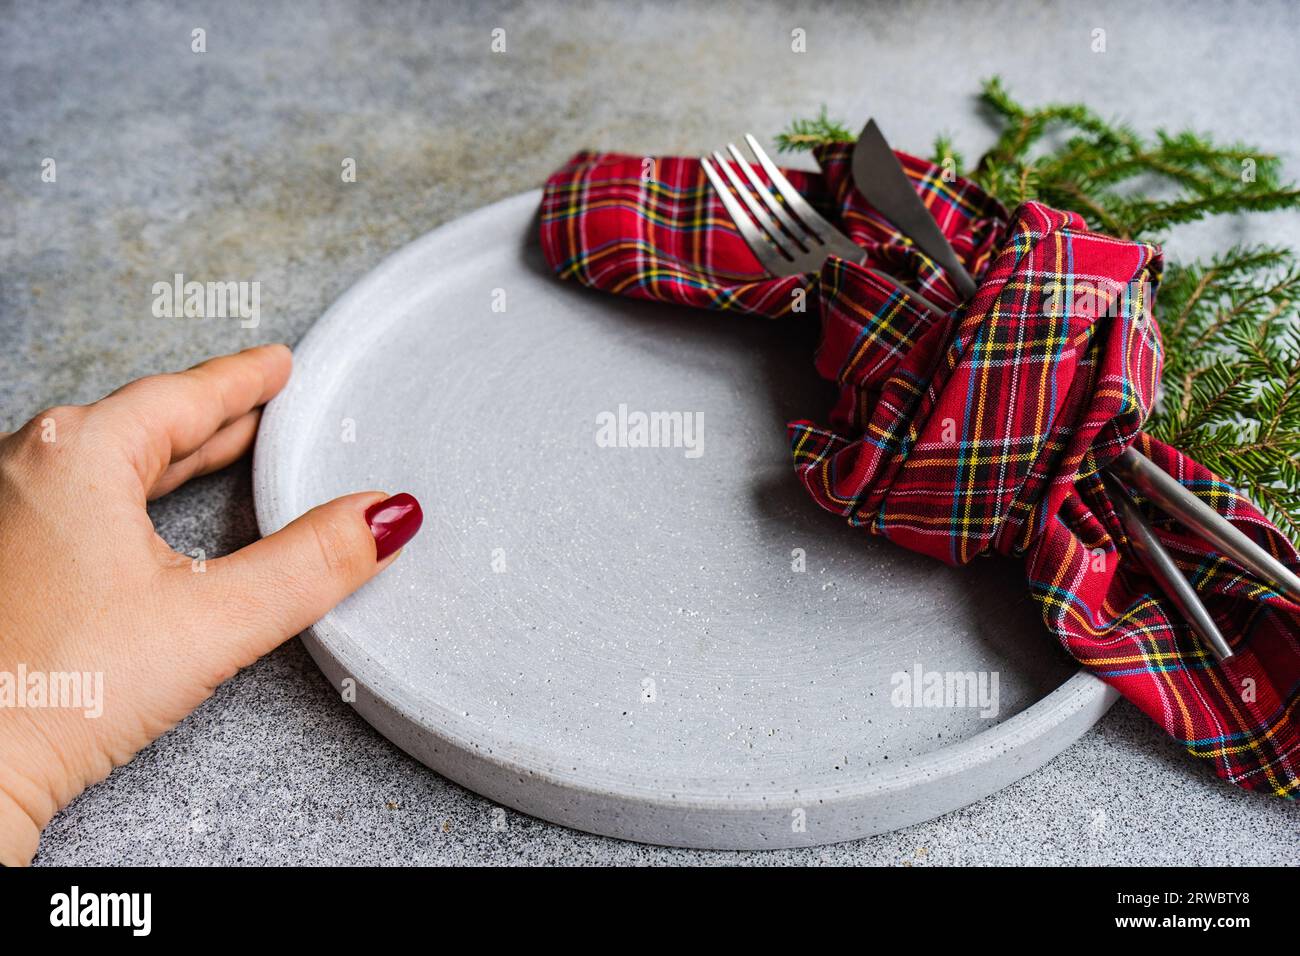 Unrecognizable female putting ceramic plate with fork and knife wrapped in checkered handkerchief on gray table near green fir sprigs Stock Photo